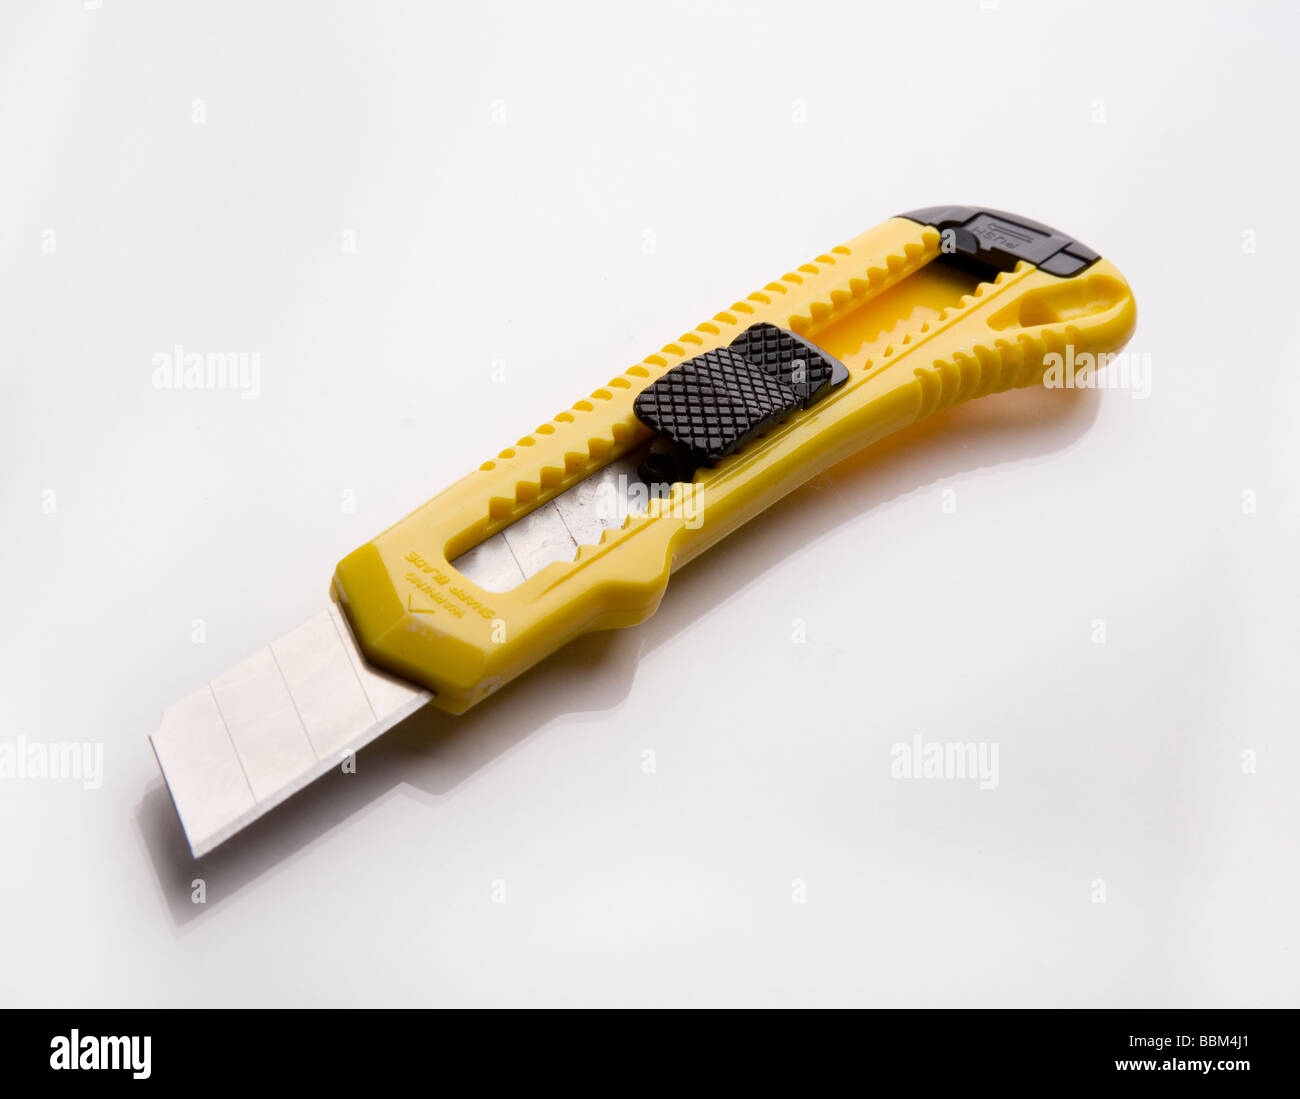 Hobby knife Cut Out Stock Images & Pictures - Alamy